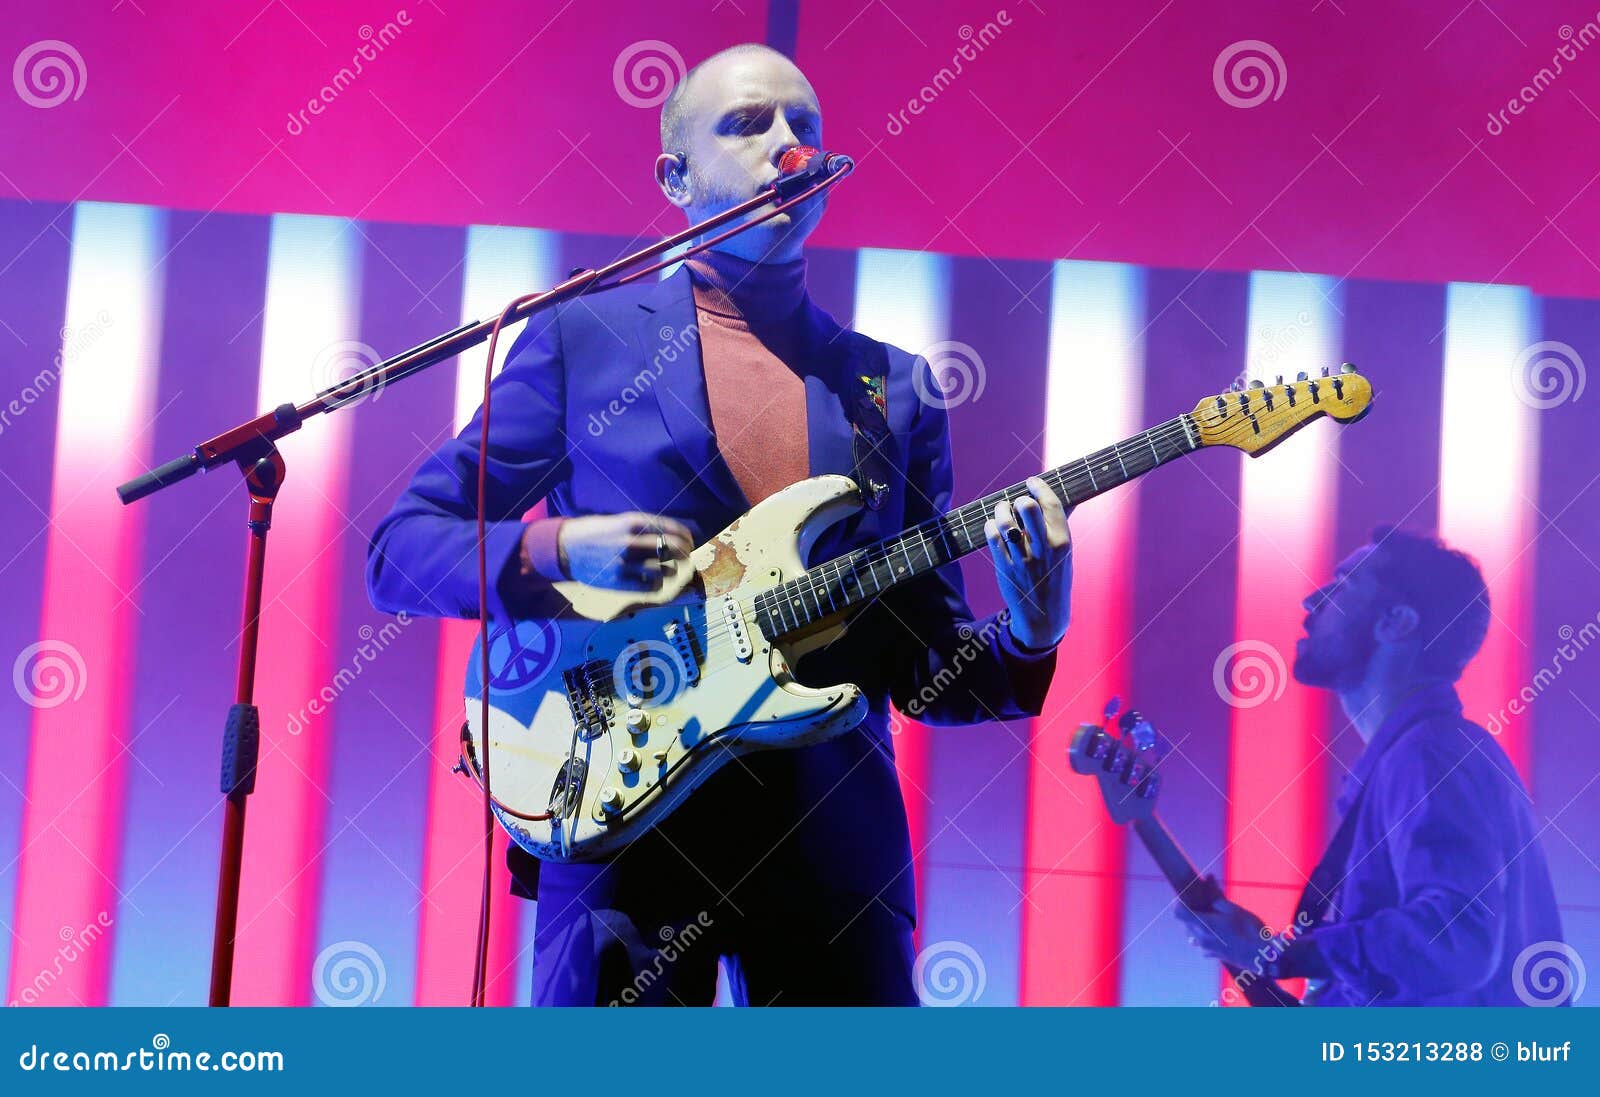 Two Door Cinema Club Performing Live in Mallorca Editorial Stock Photo -  Image of lead, guitar: 153213288